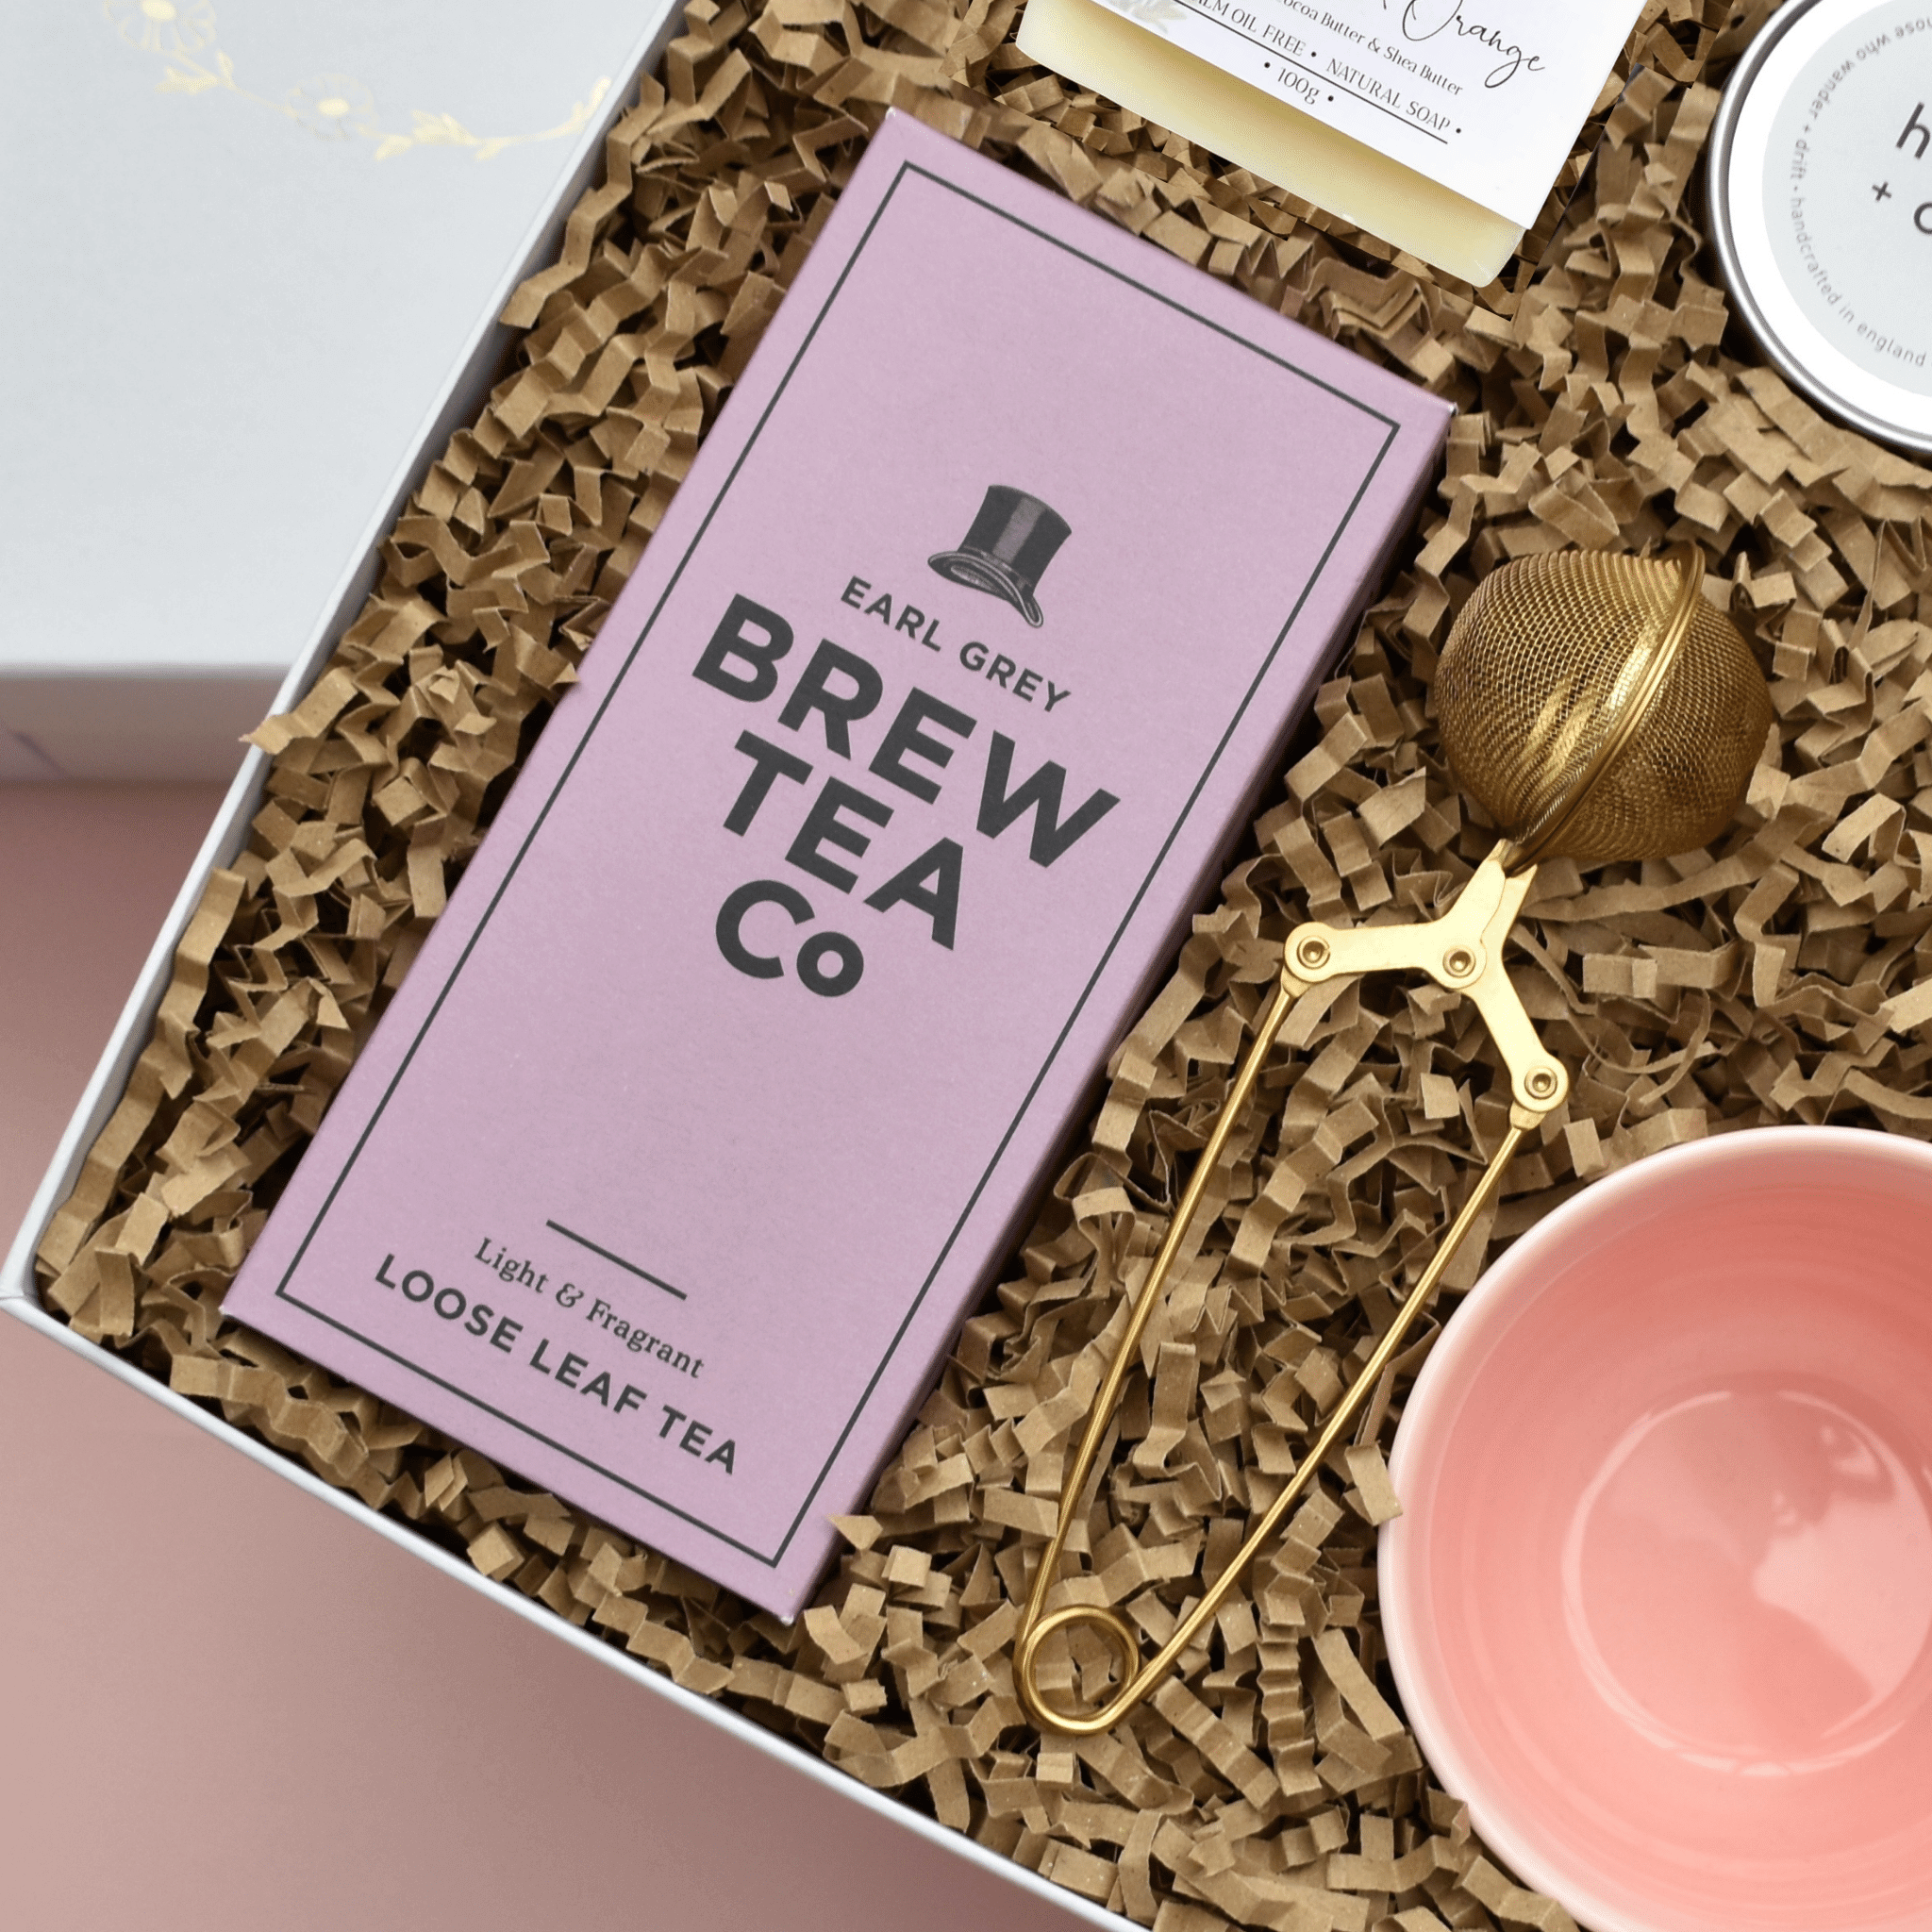 The Pink Lavender Gift Box